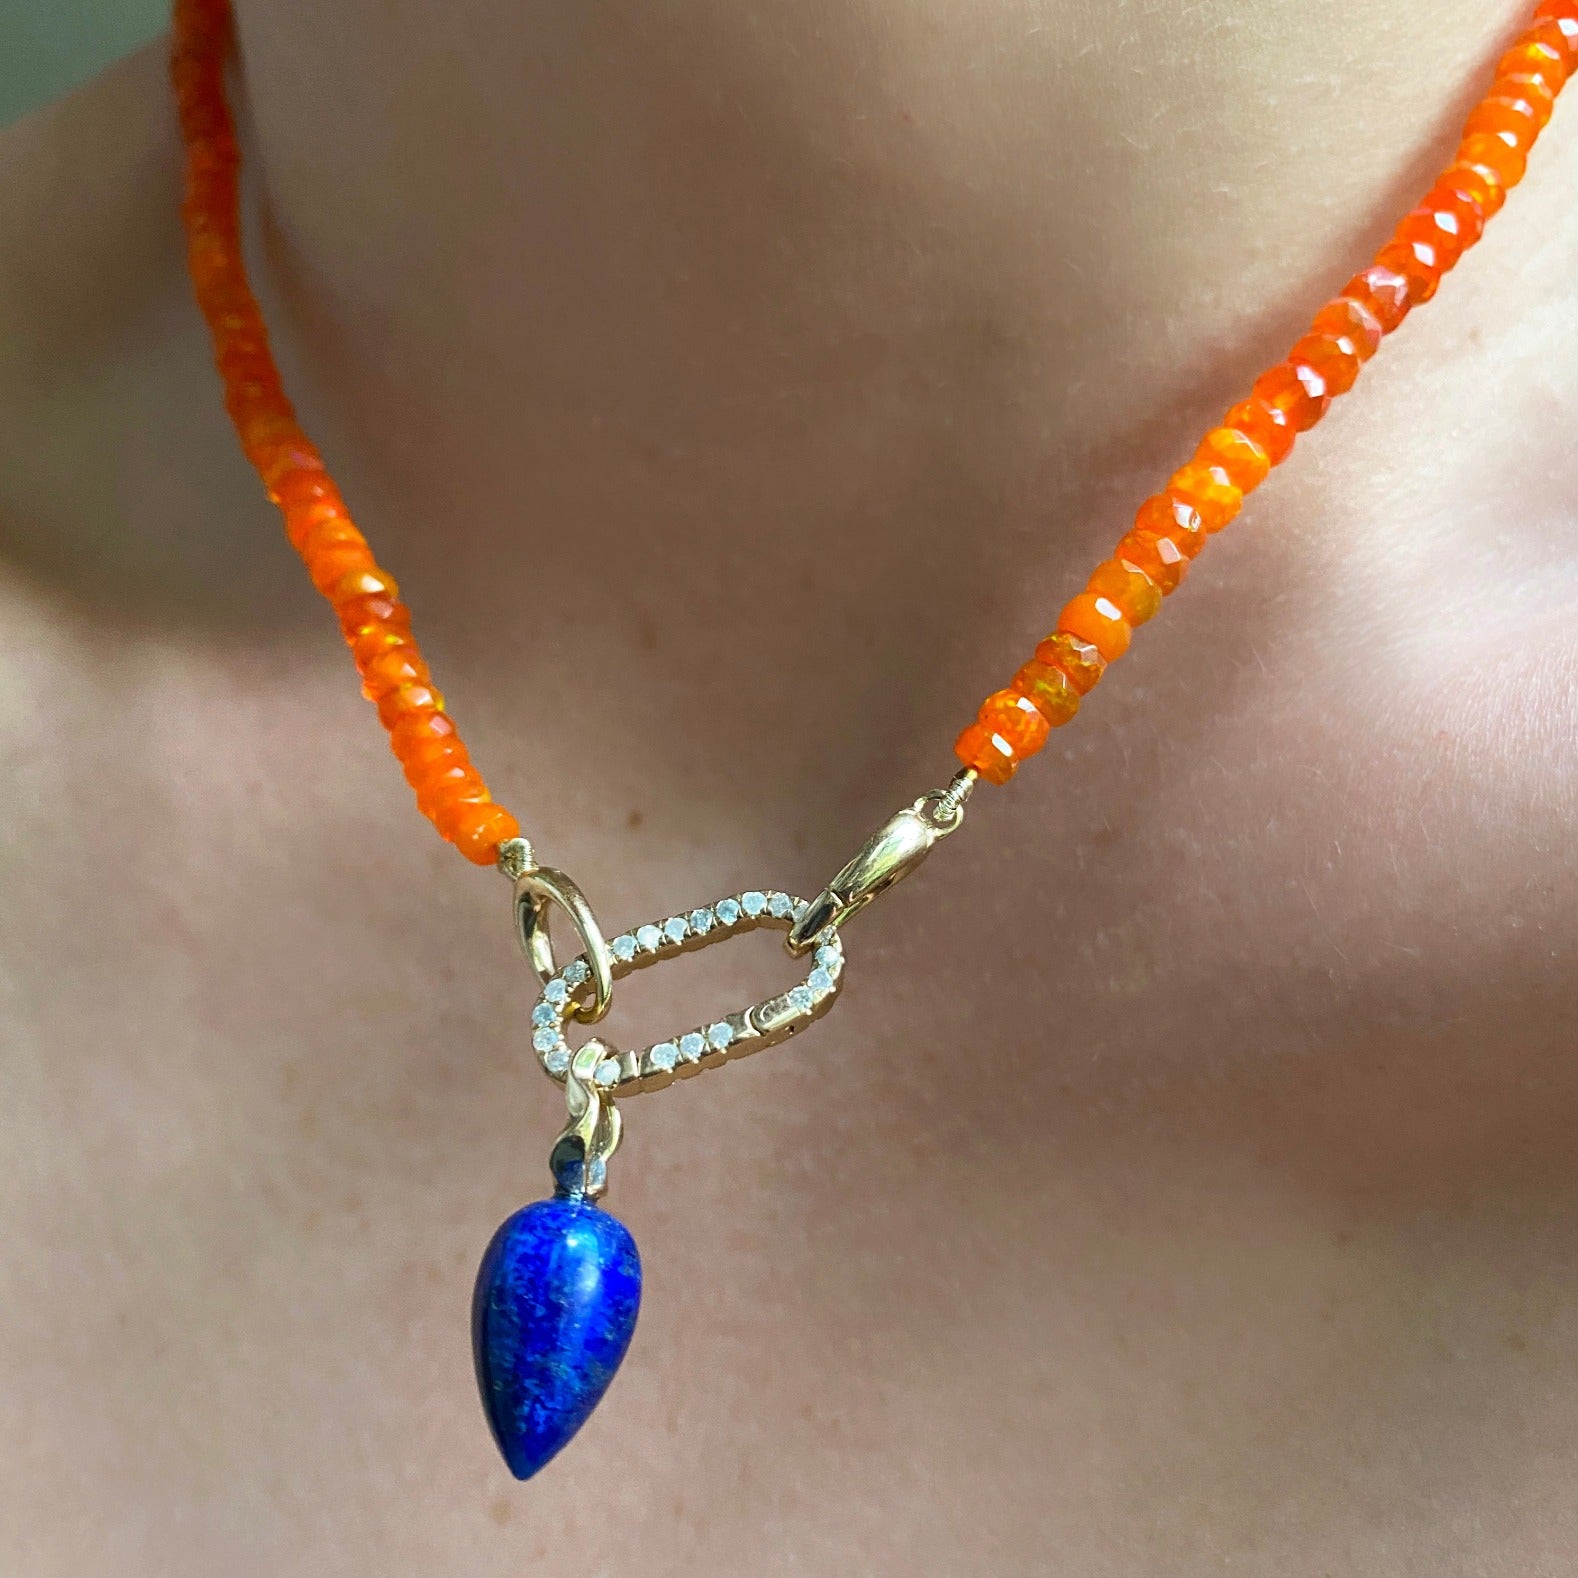 Shimmering beaded necklace made of faceted opals in shades of orange on a gold linking ovals clasp. Styled on a neck layered with a medium pave face charm lock and a lapis acorn drop charm